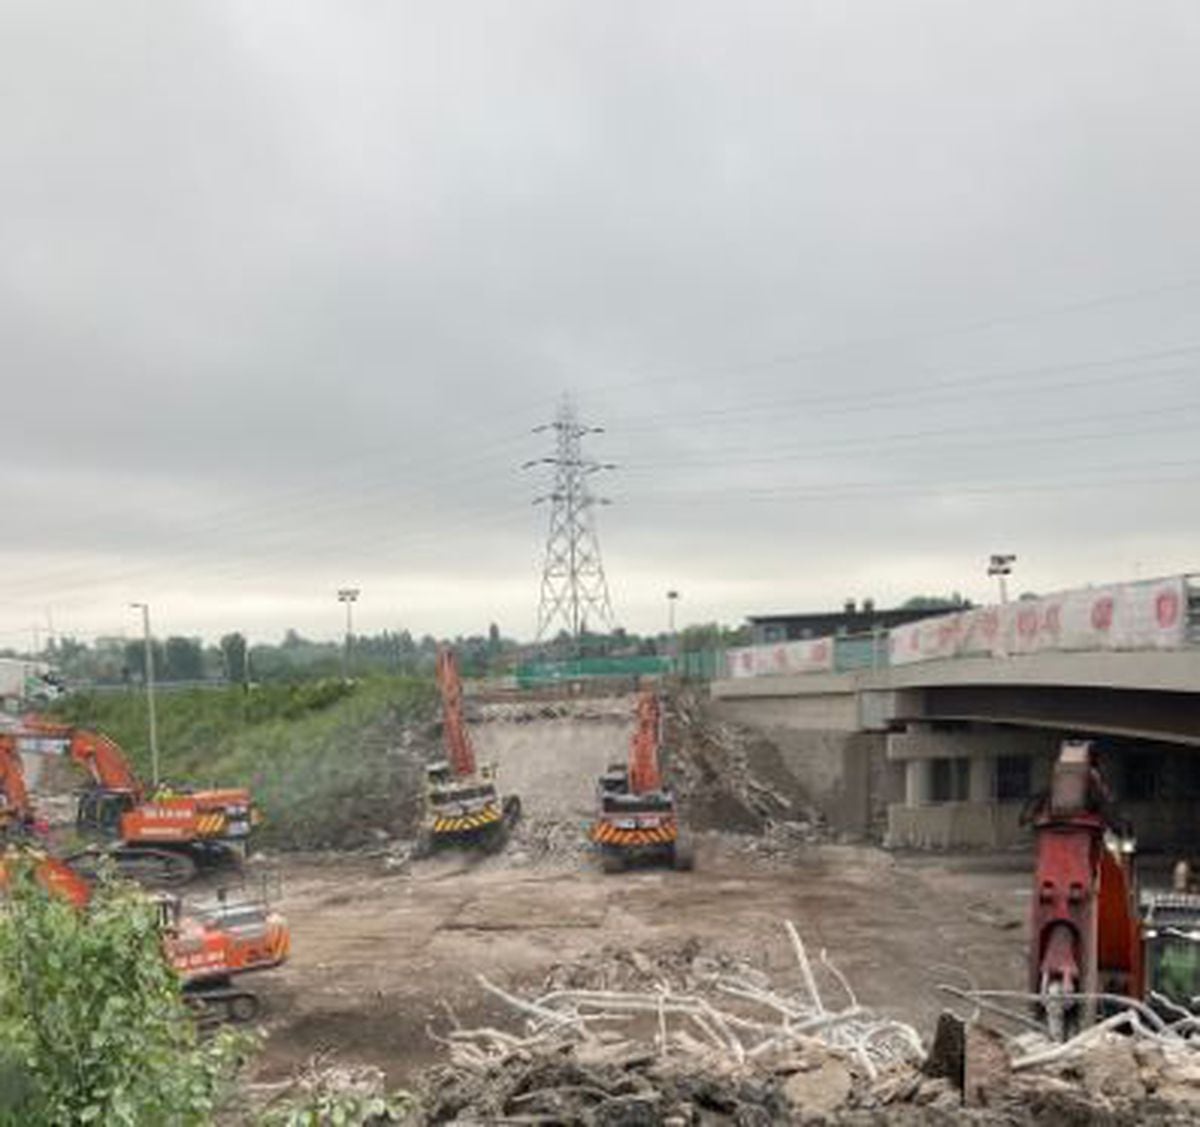 The old bridge which spanned the motorway at junction 10 of the M6 has been demolished